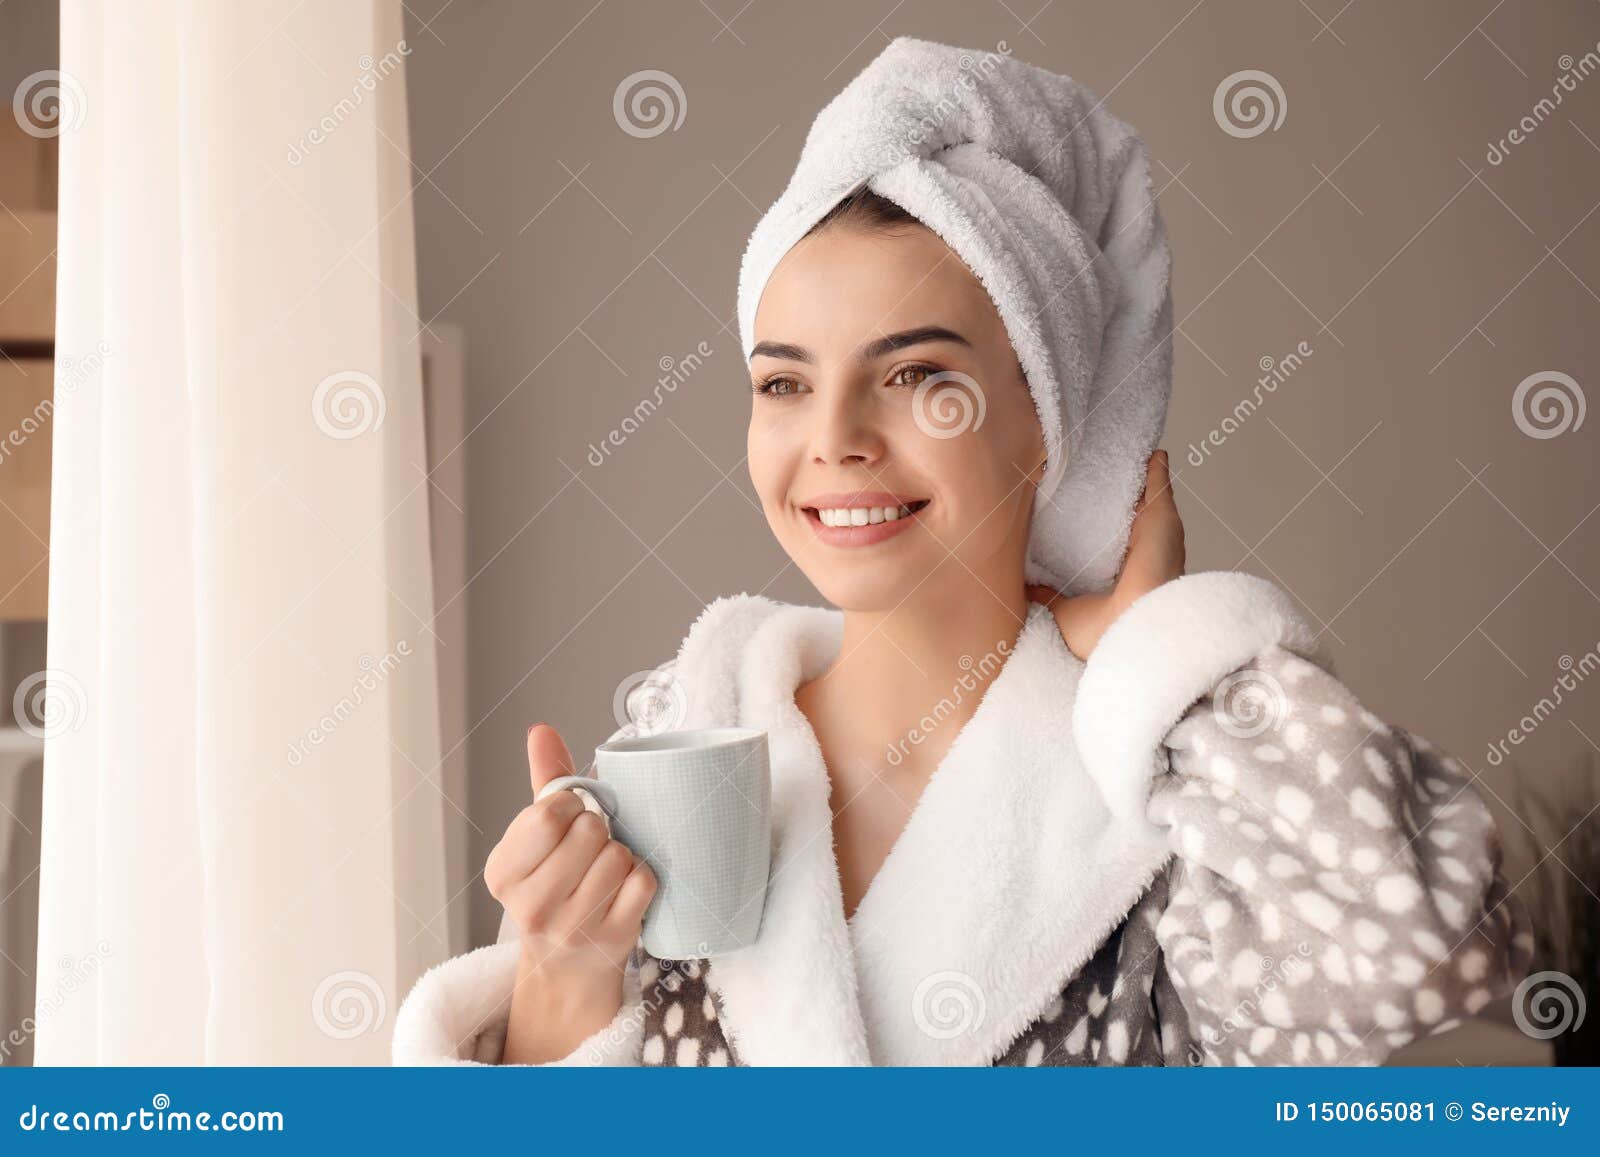 Morning of Beautiful Young Woman Drinking Coffee at Home Stock Image ...